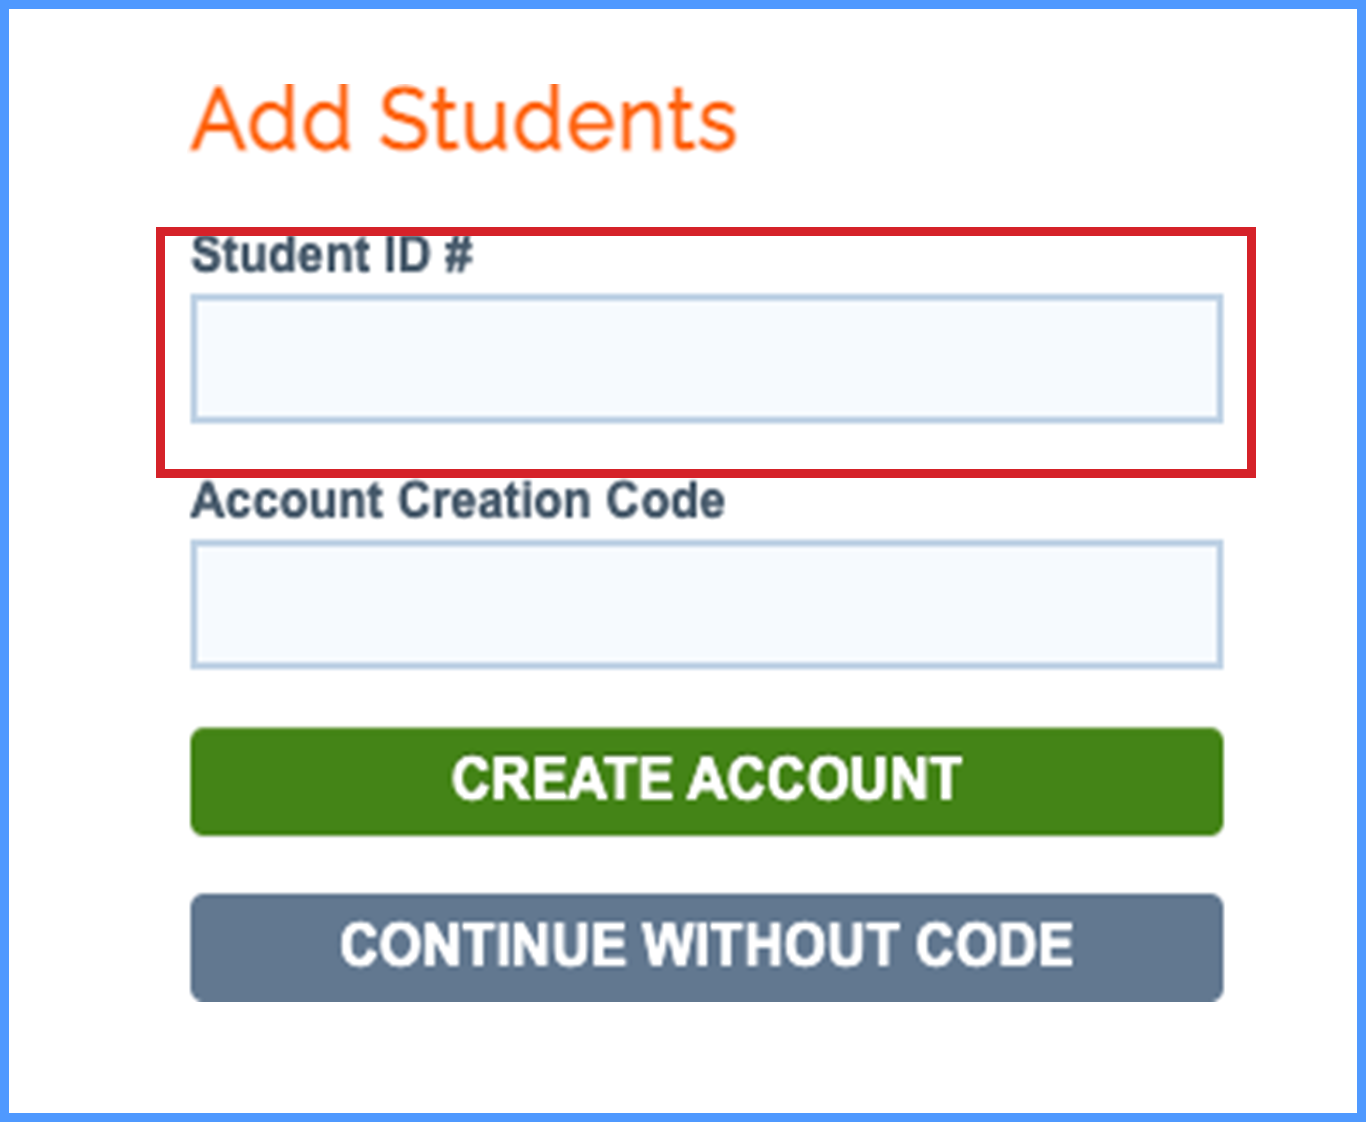 Add Students ID page with “Student ID#” squared in red